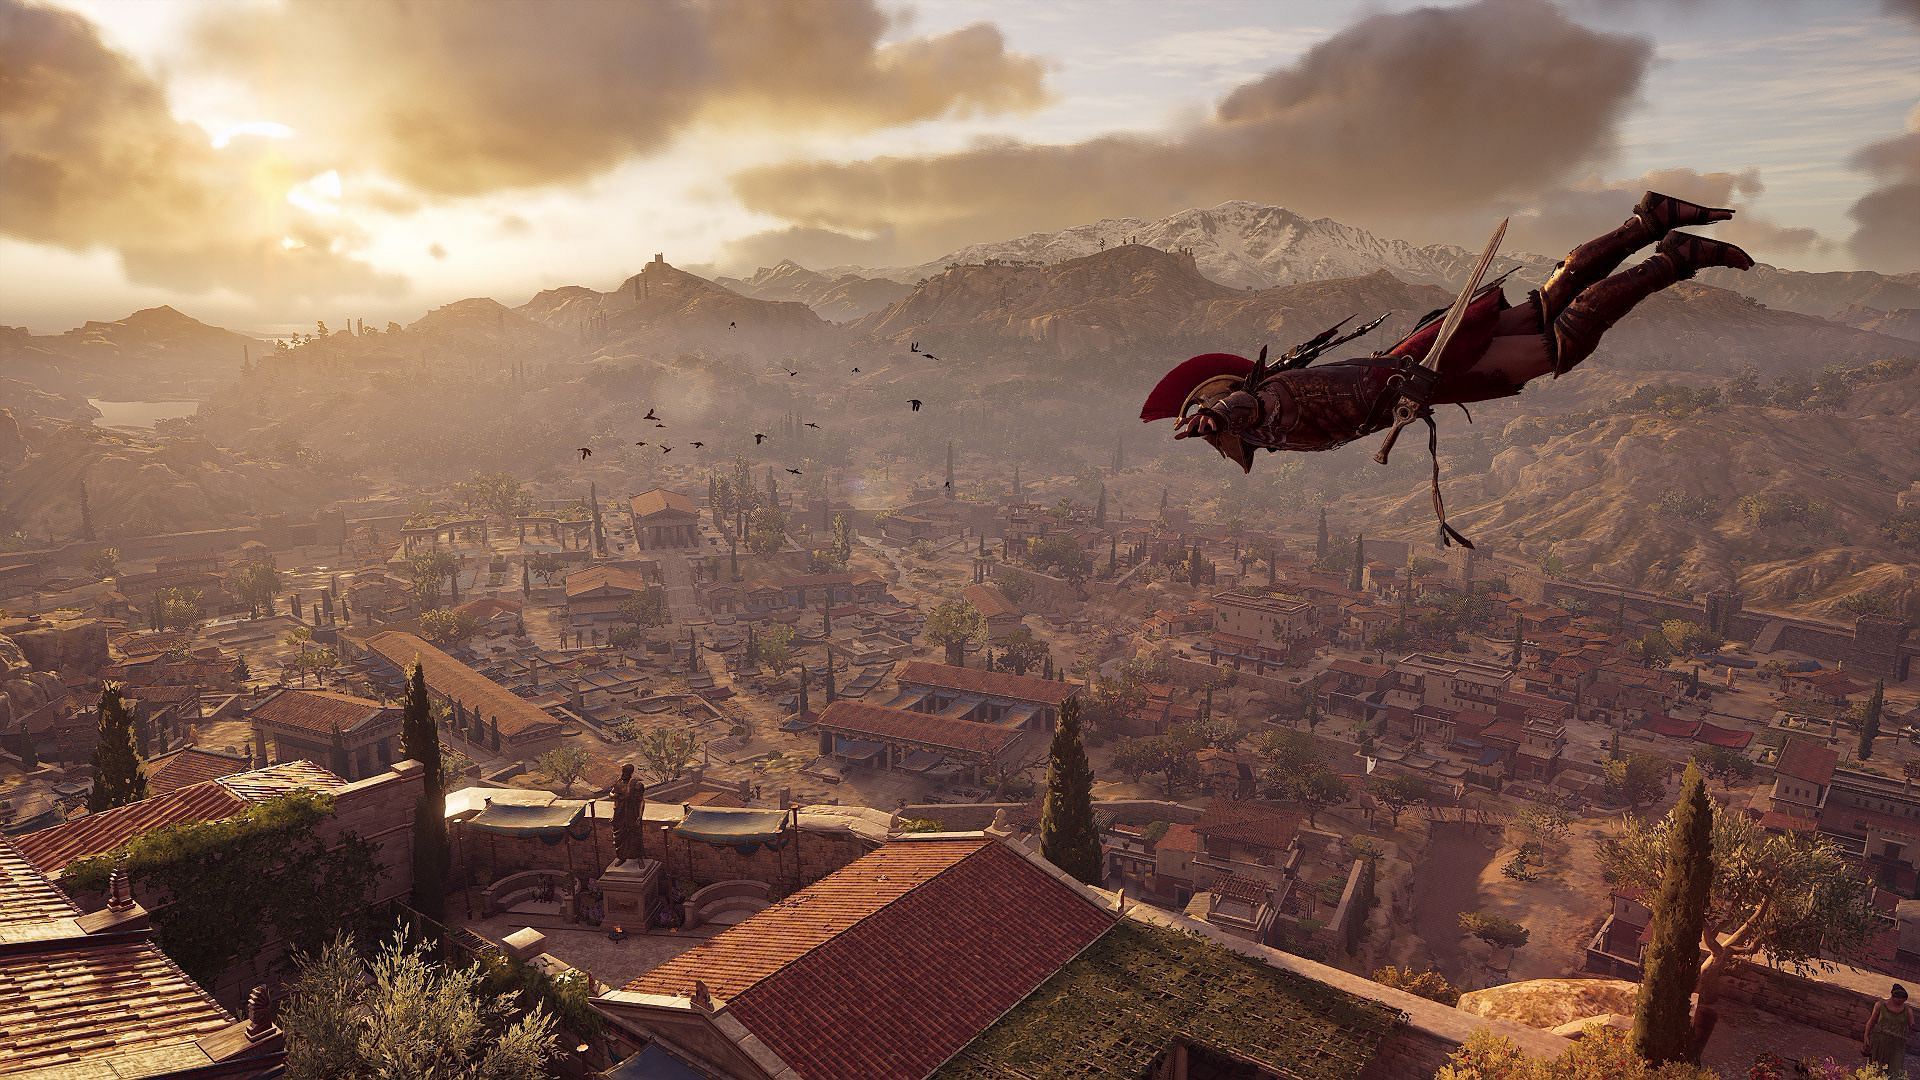 Odyssey features one of the best open world and map expanses in the franchise (Image via Ubisoft)